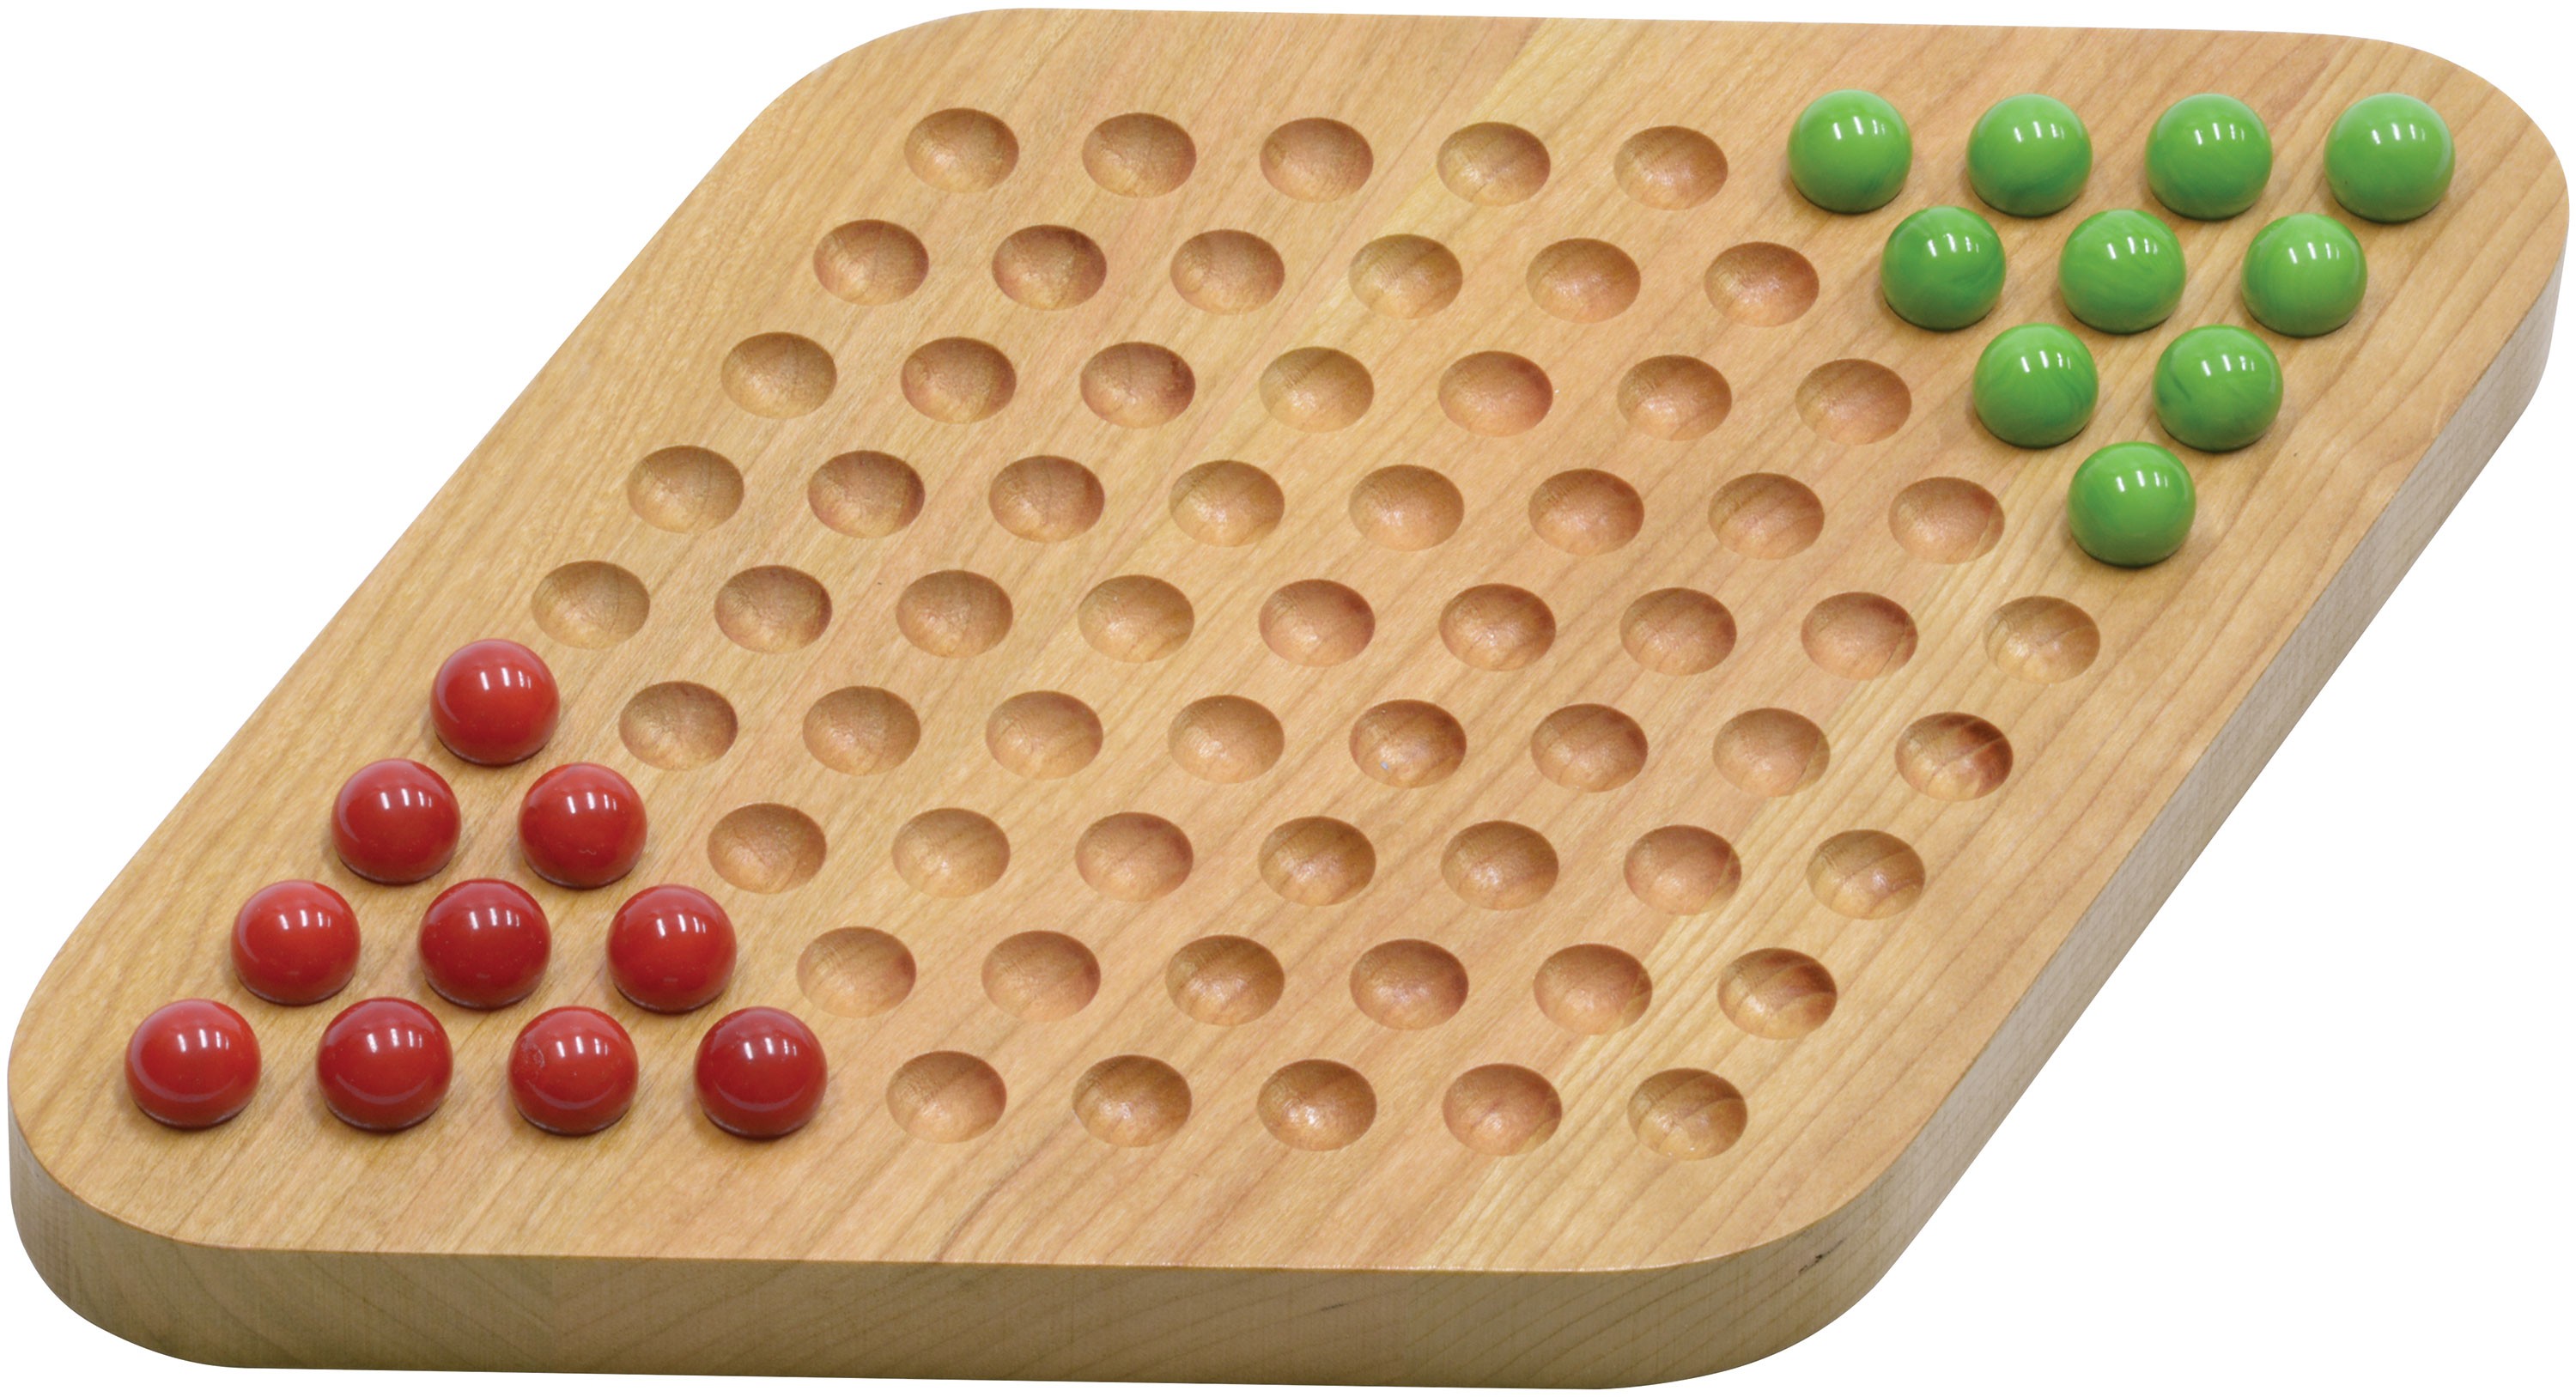 Chinese checkers rules for two players - persianLasi